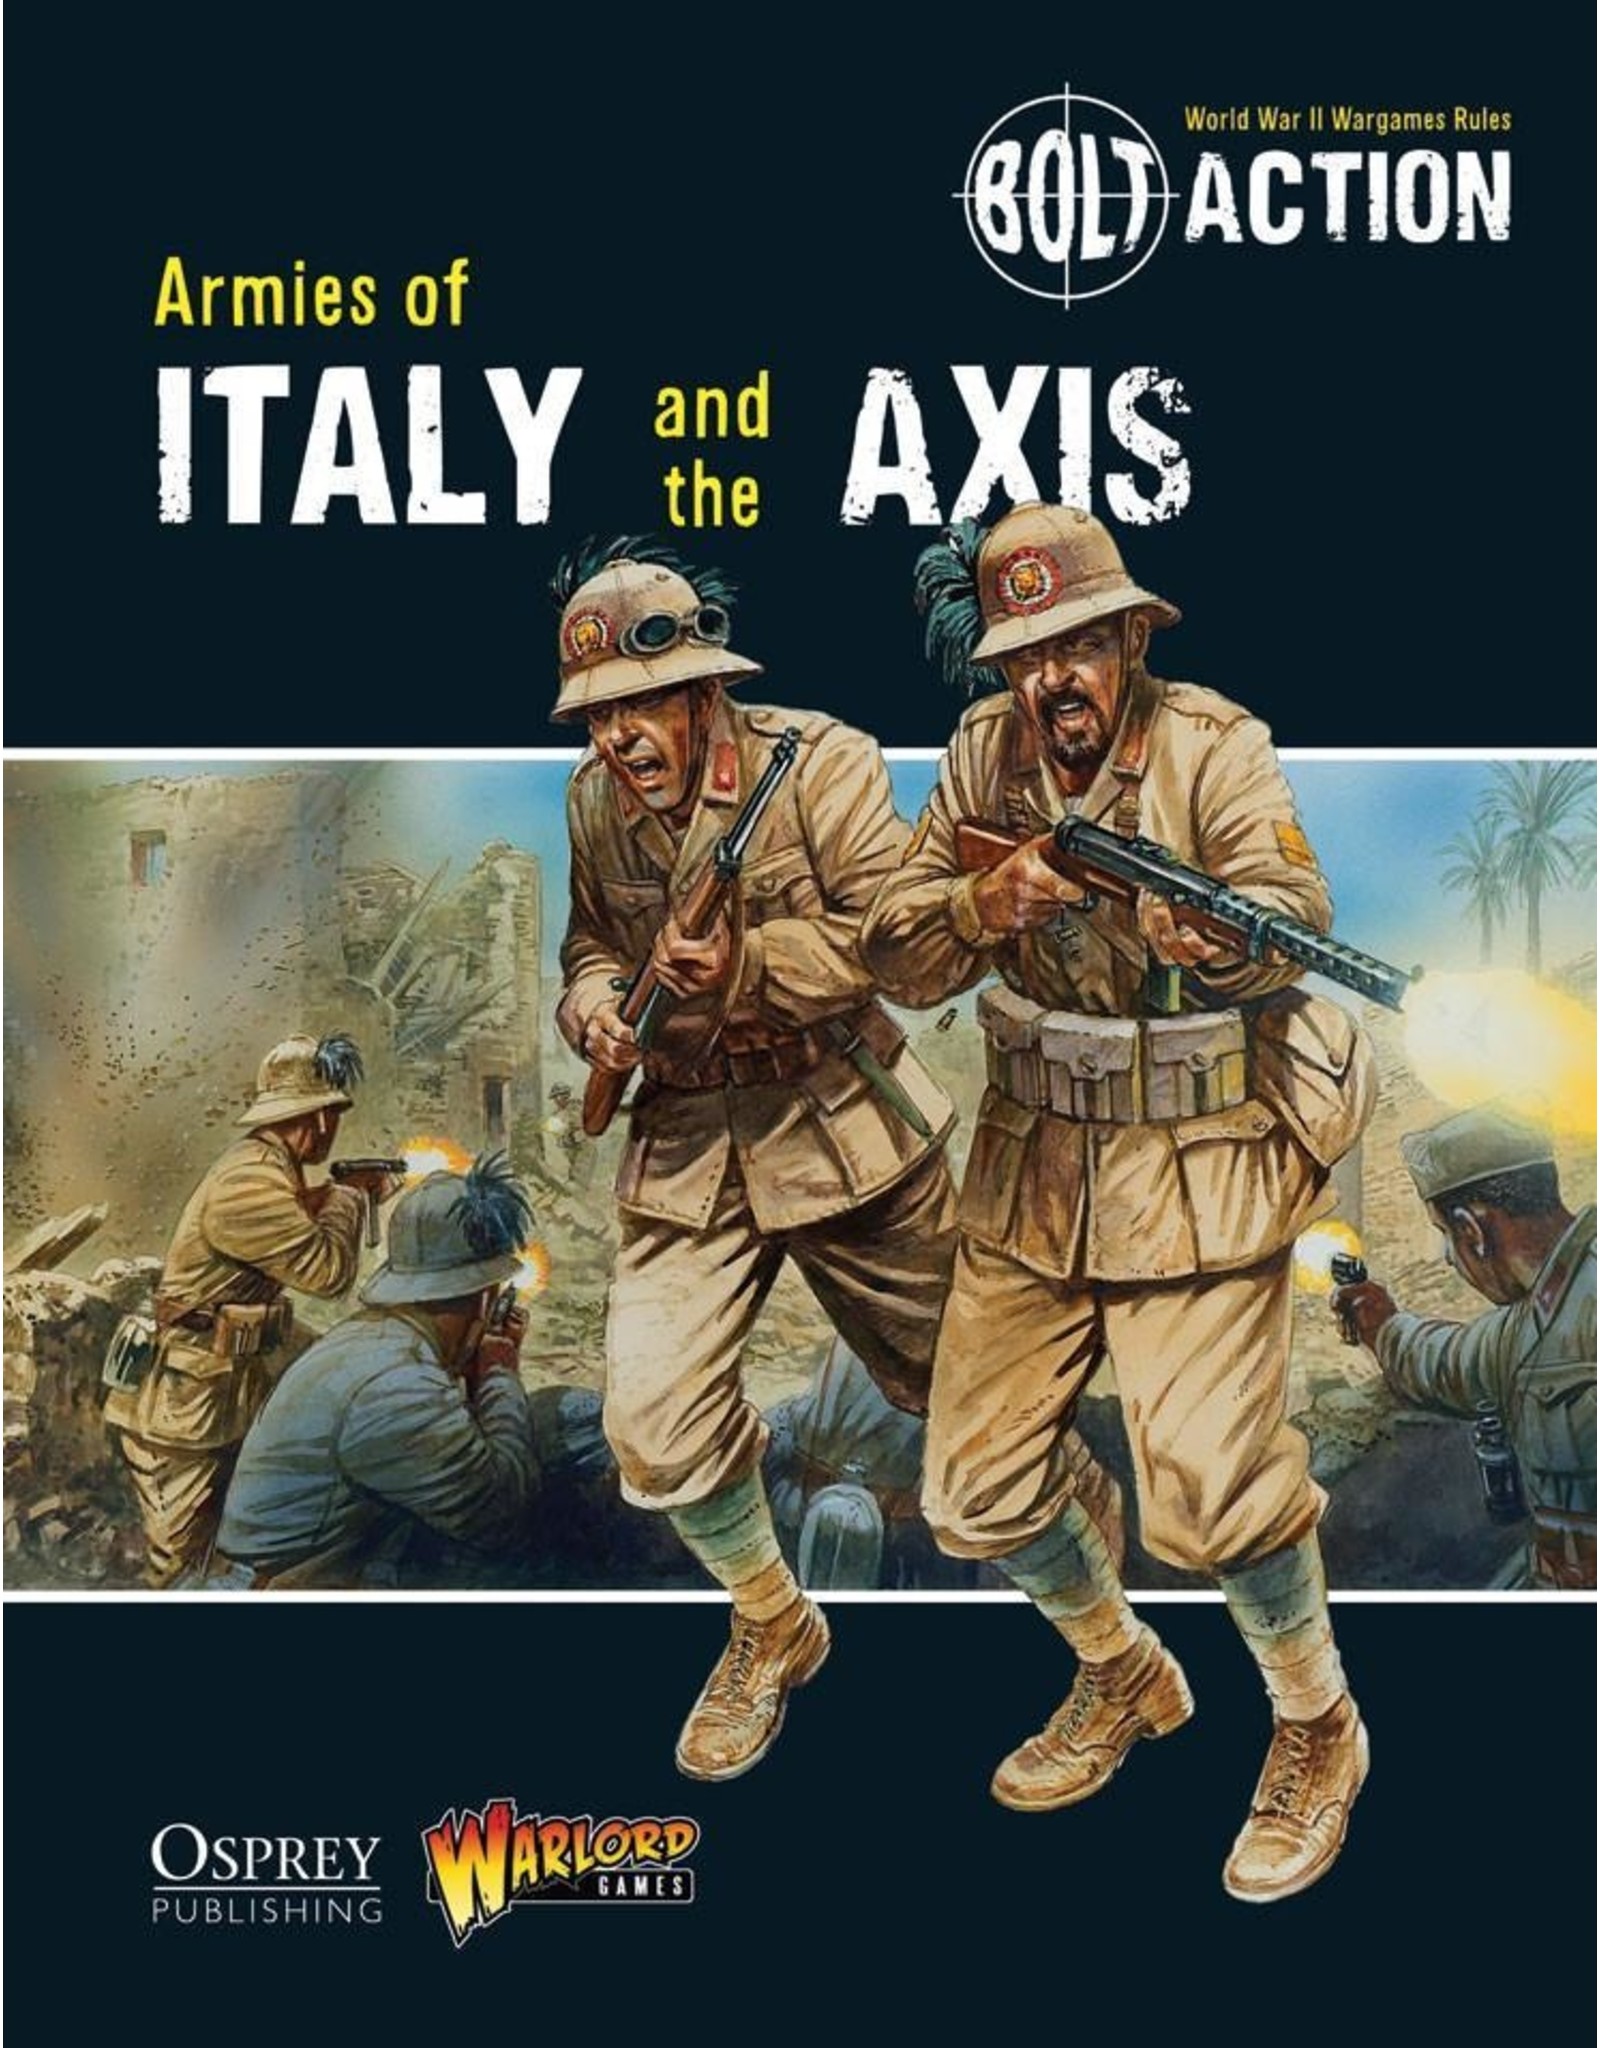 *Armies of Italy and the Axis